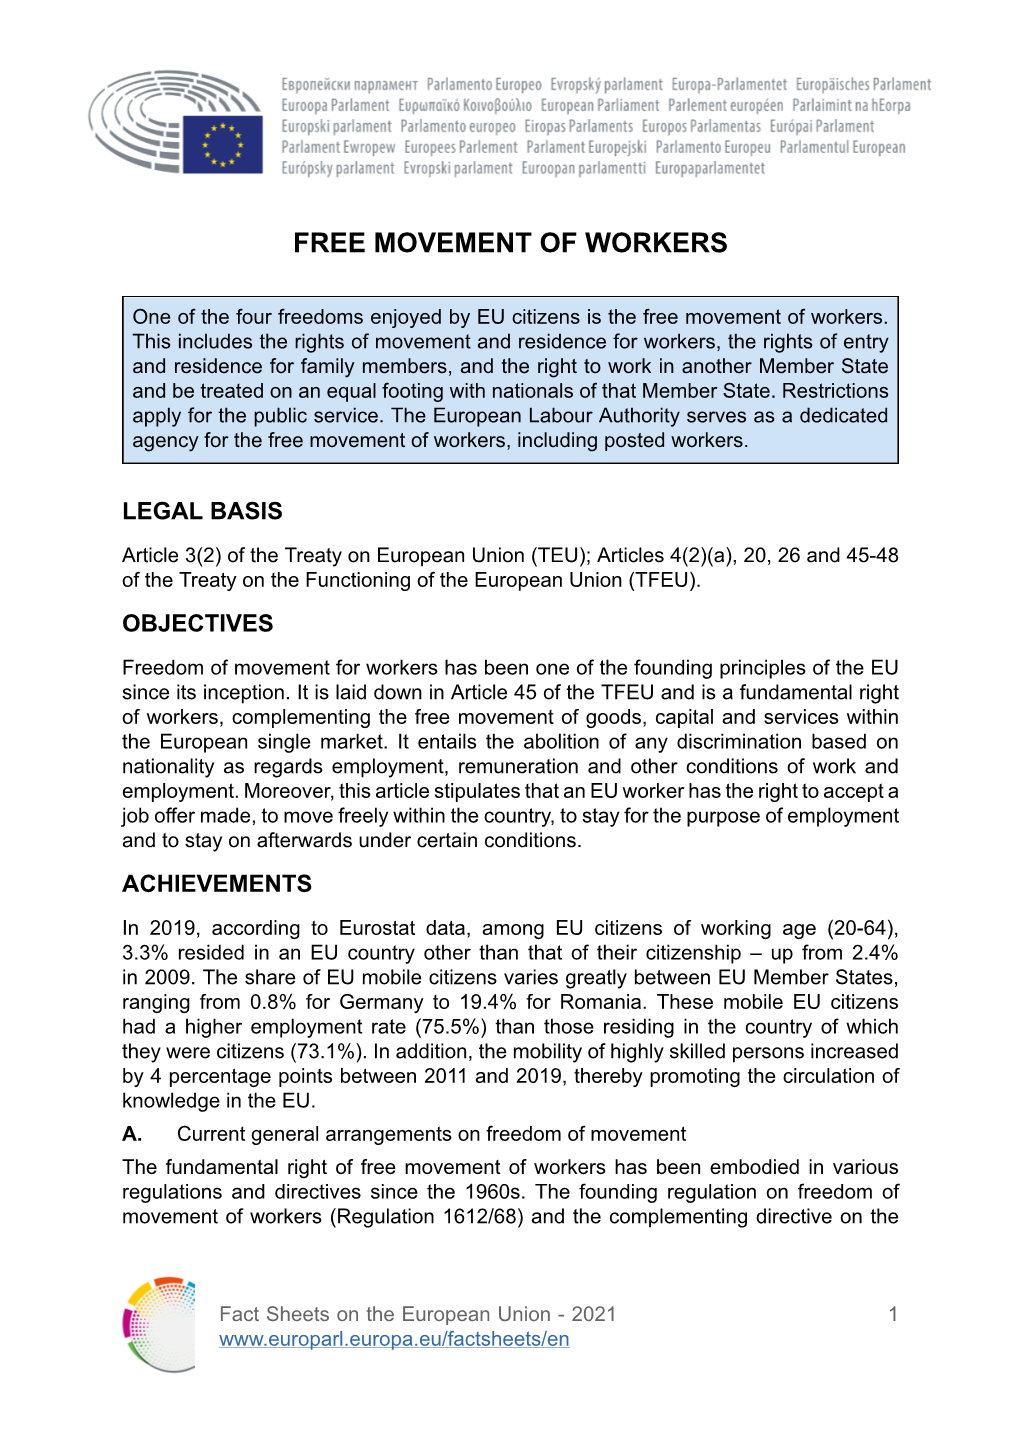 Free Movement of Workers